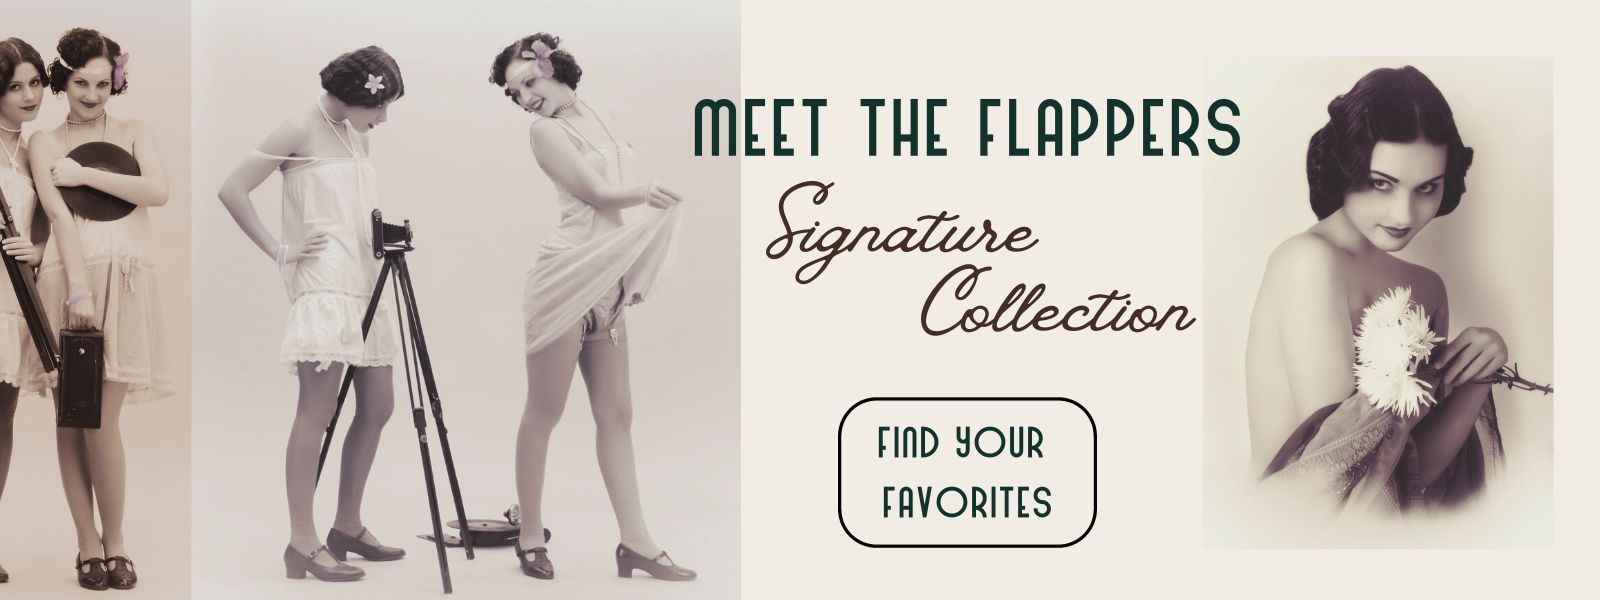 Meet The Flapper Girls 1920s Signature Collection